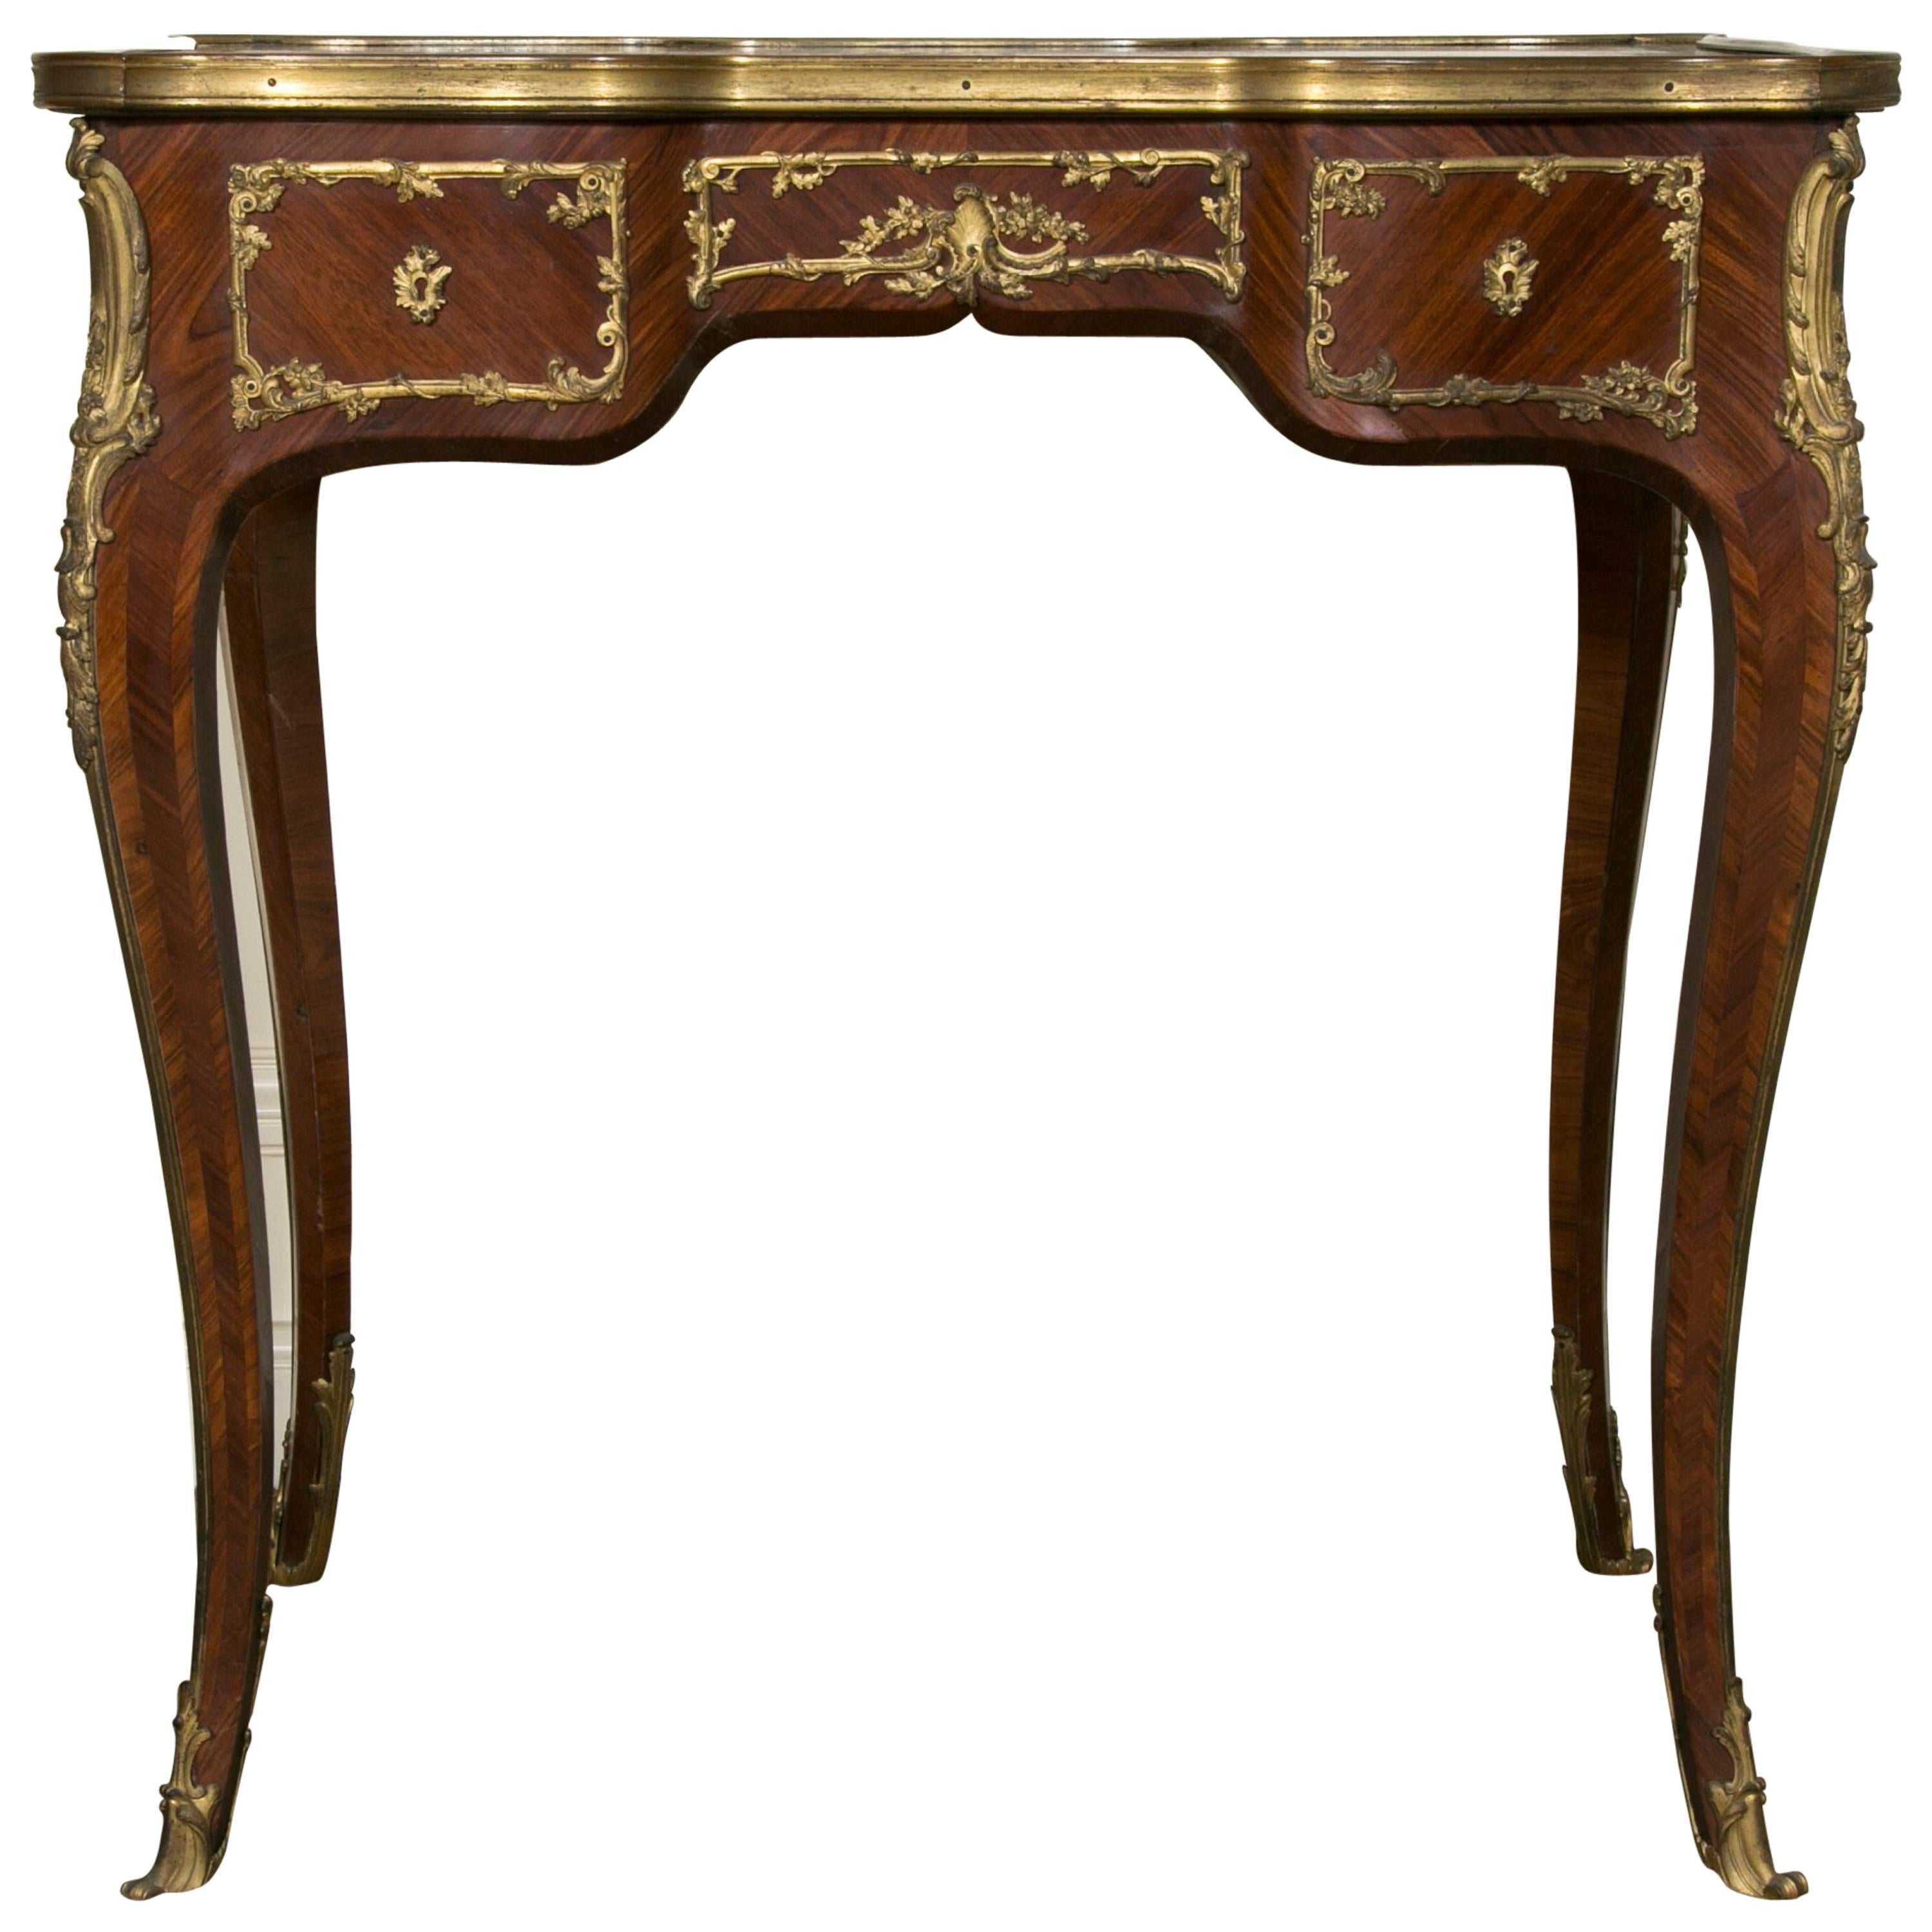 French Kingwood Marquetry and Ormolu Mounted LXV Style Table Signed Raulin For Sale